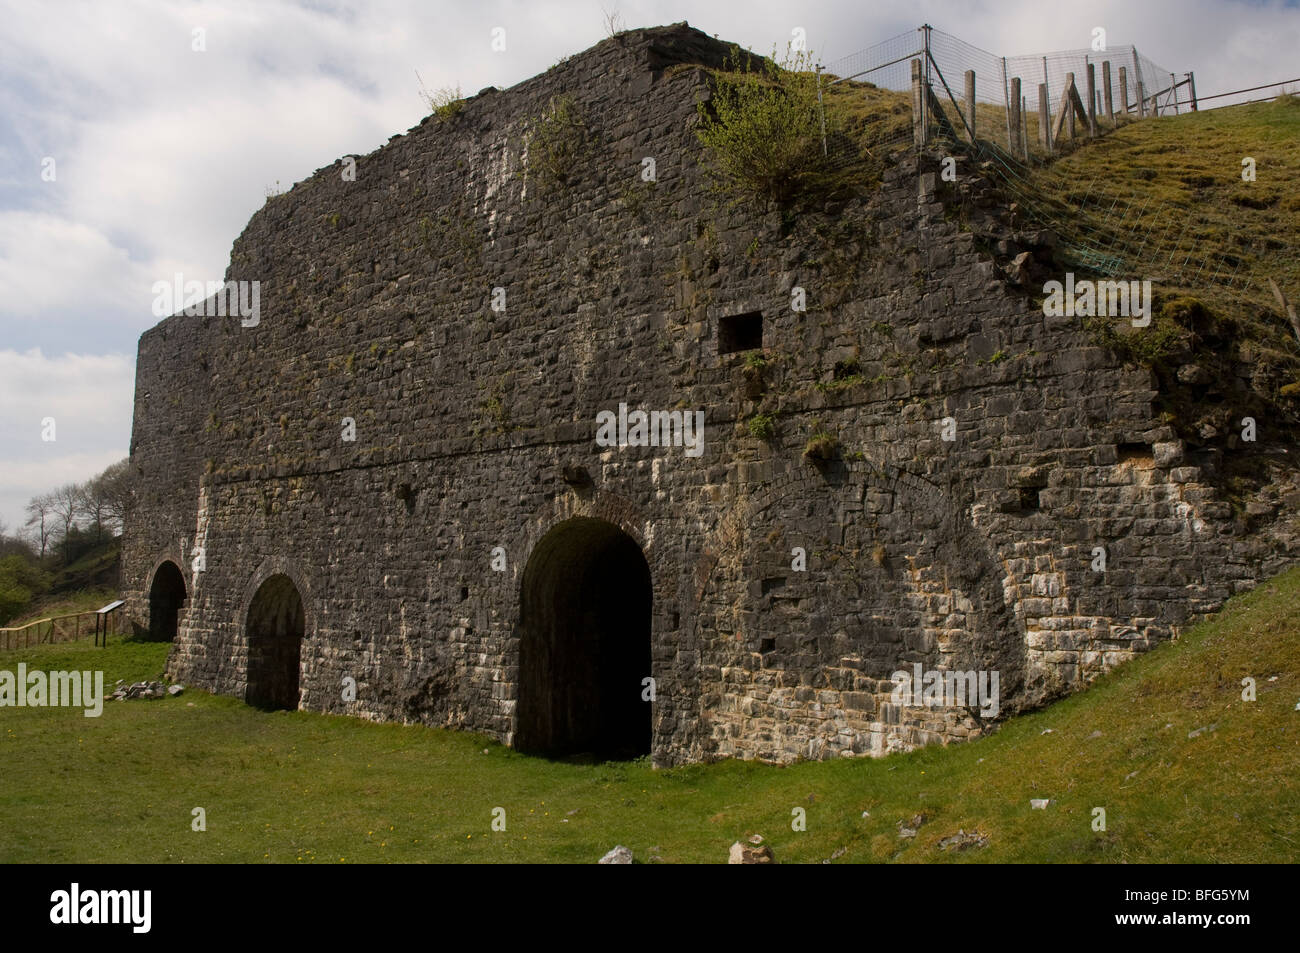 Lime kiln, Cwm Twrch, Brecon Beacons National Park, Wales, UK, Europe Stock Photo